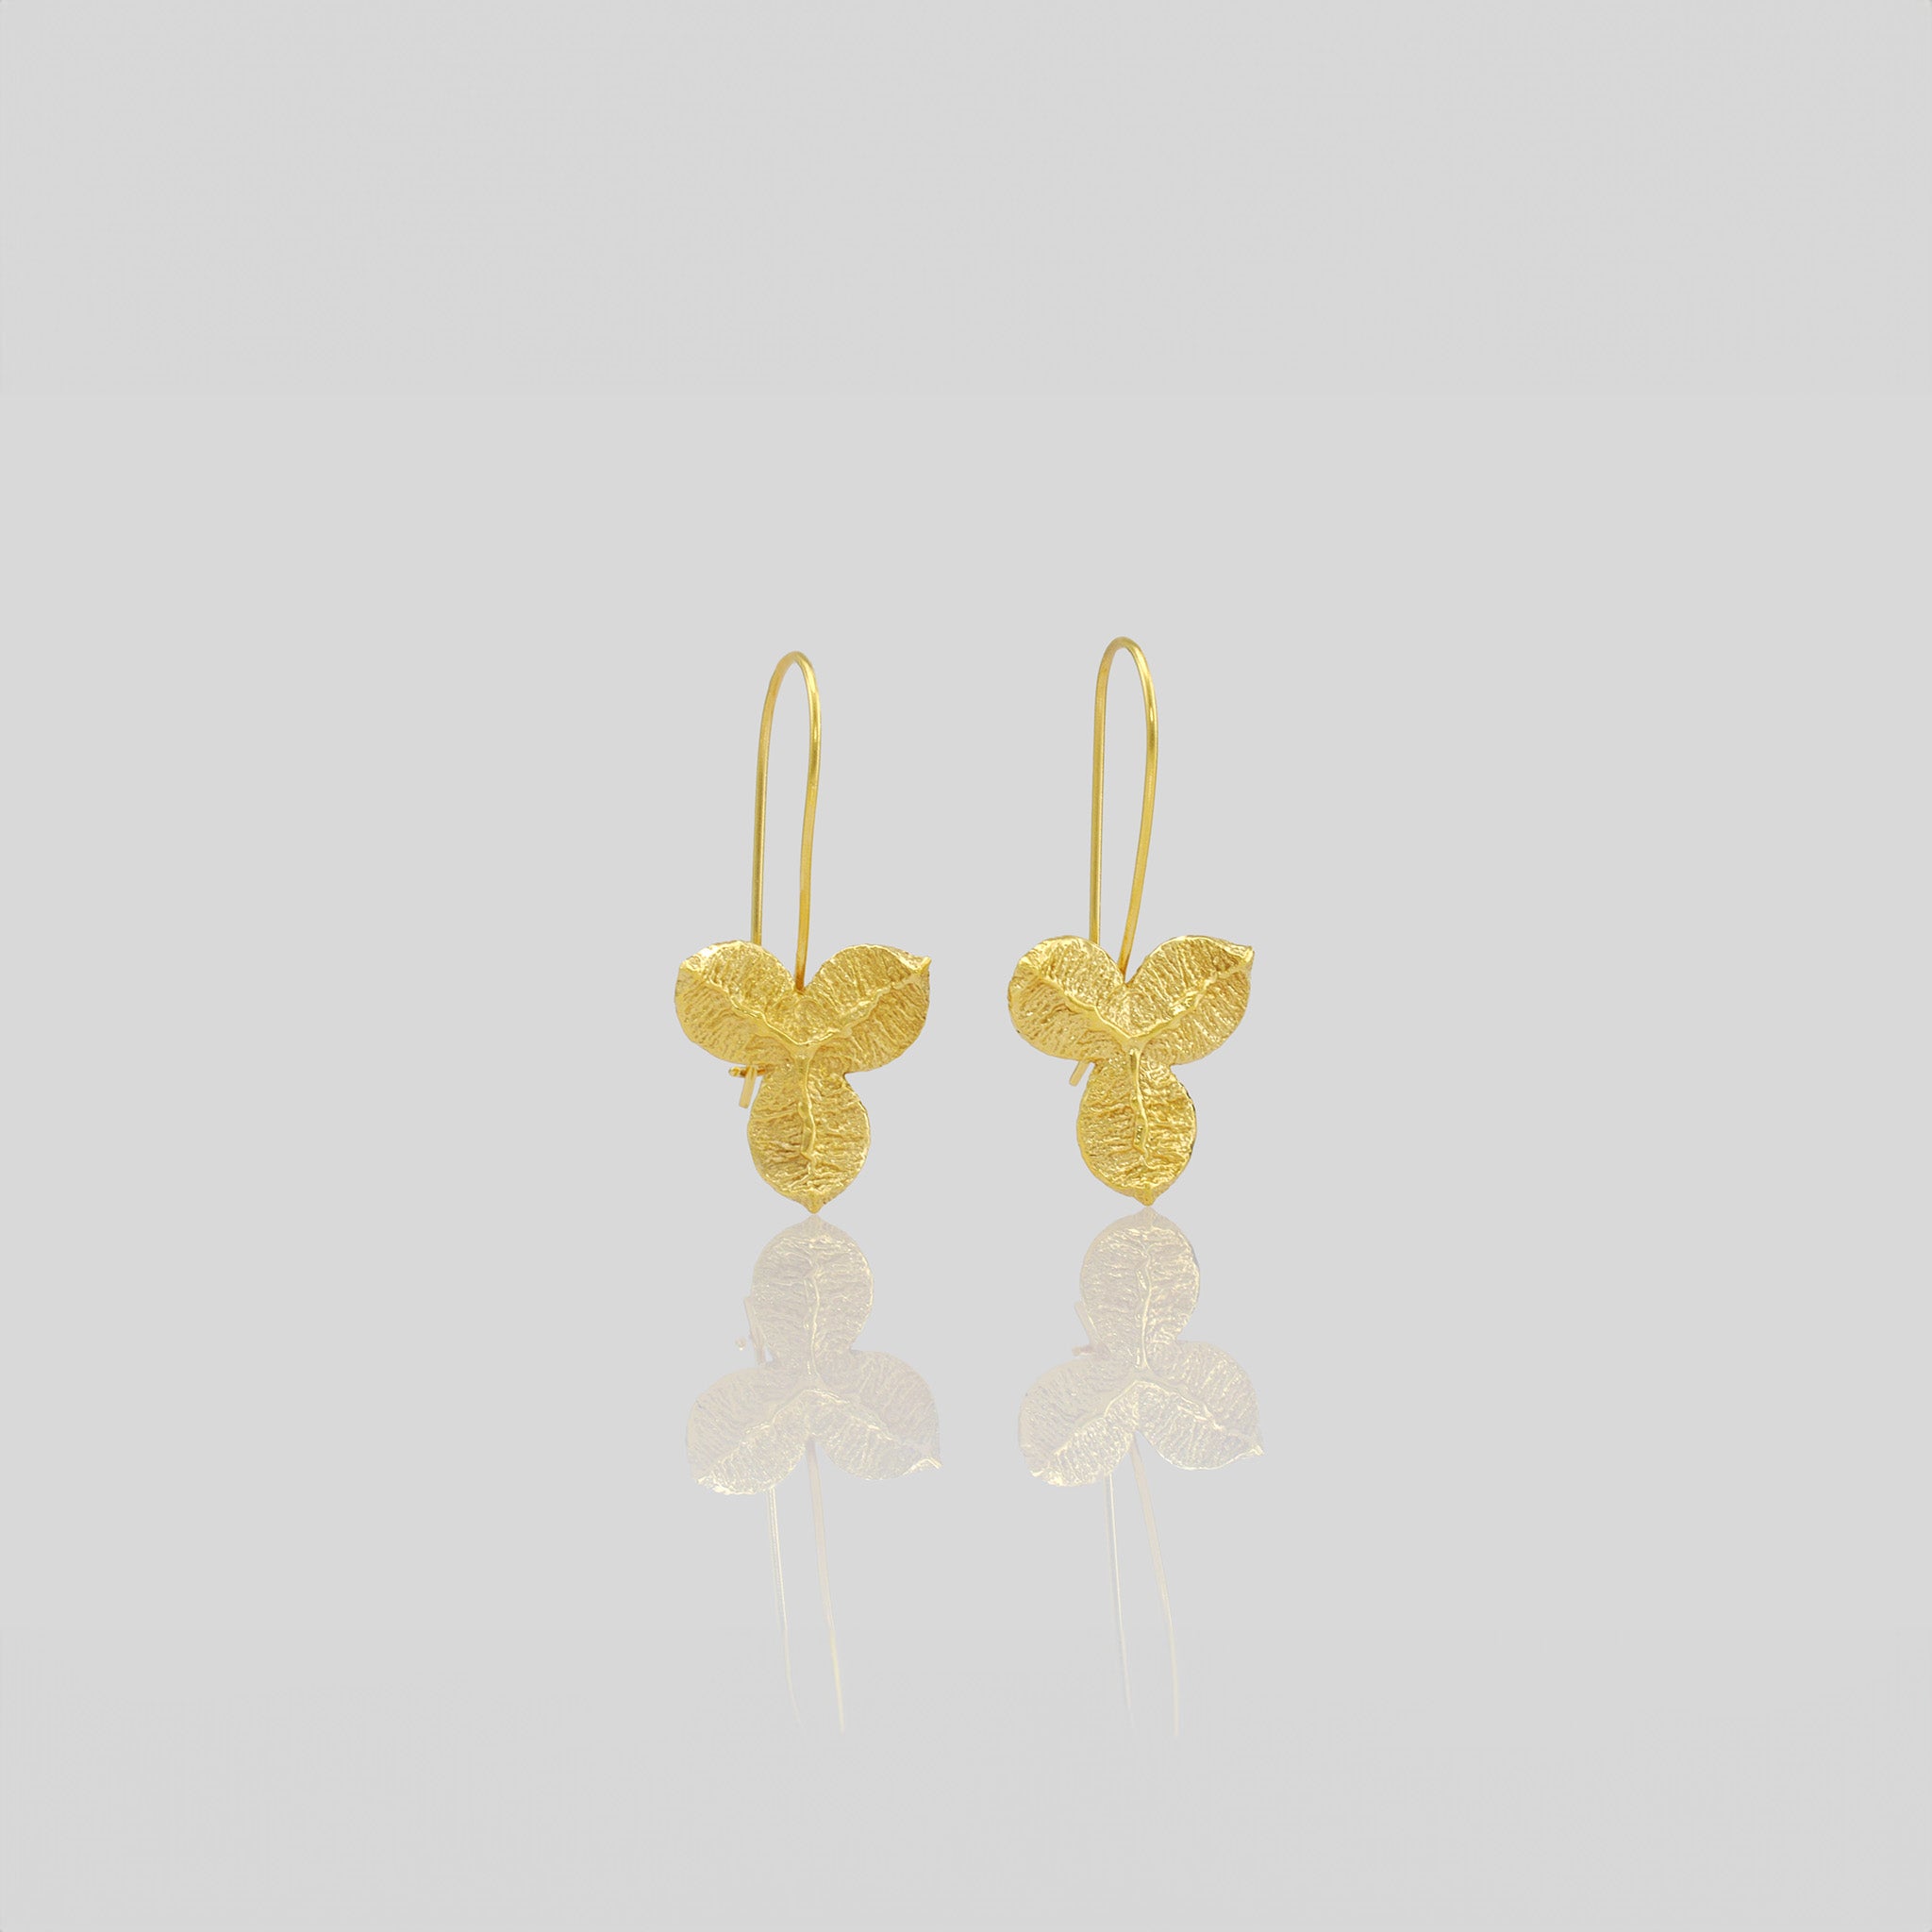 Nature-inspired Yellow Gold Drop Earrings with Unique Textured Design.